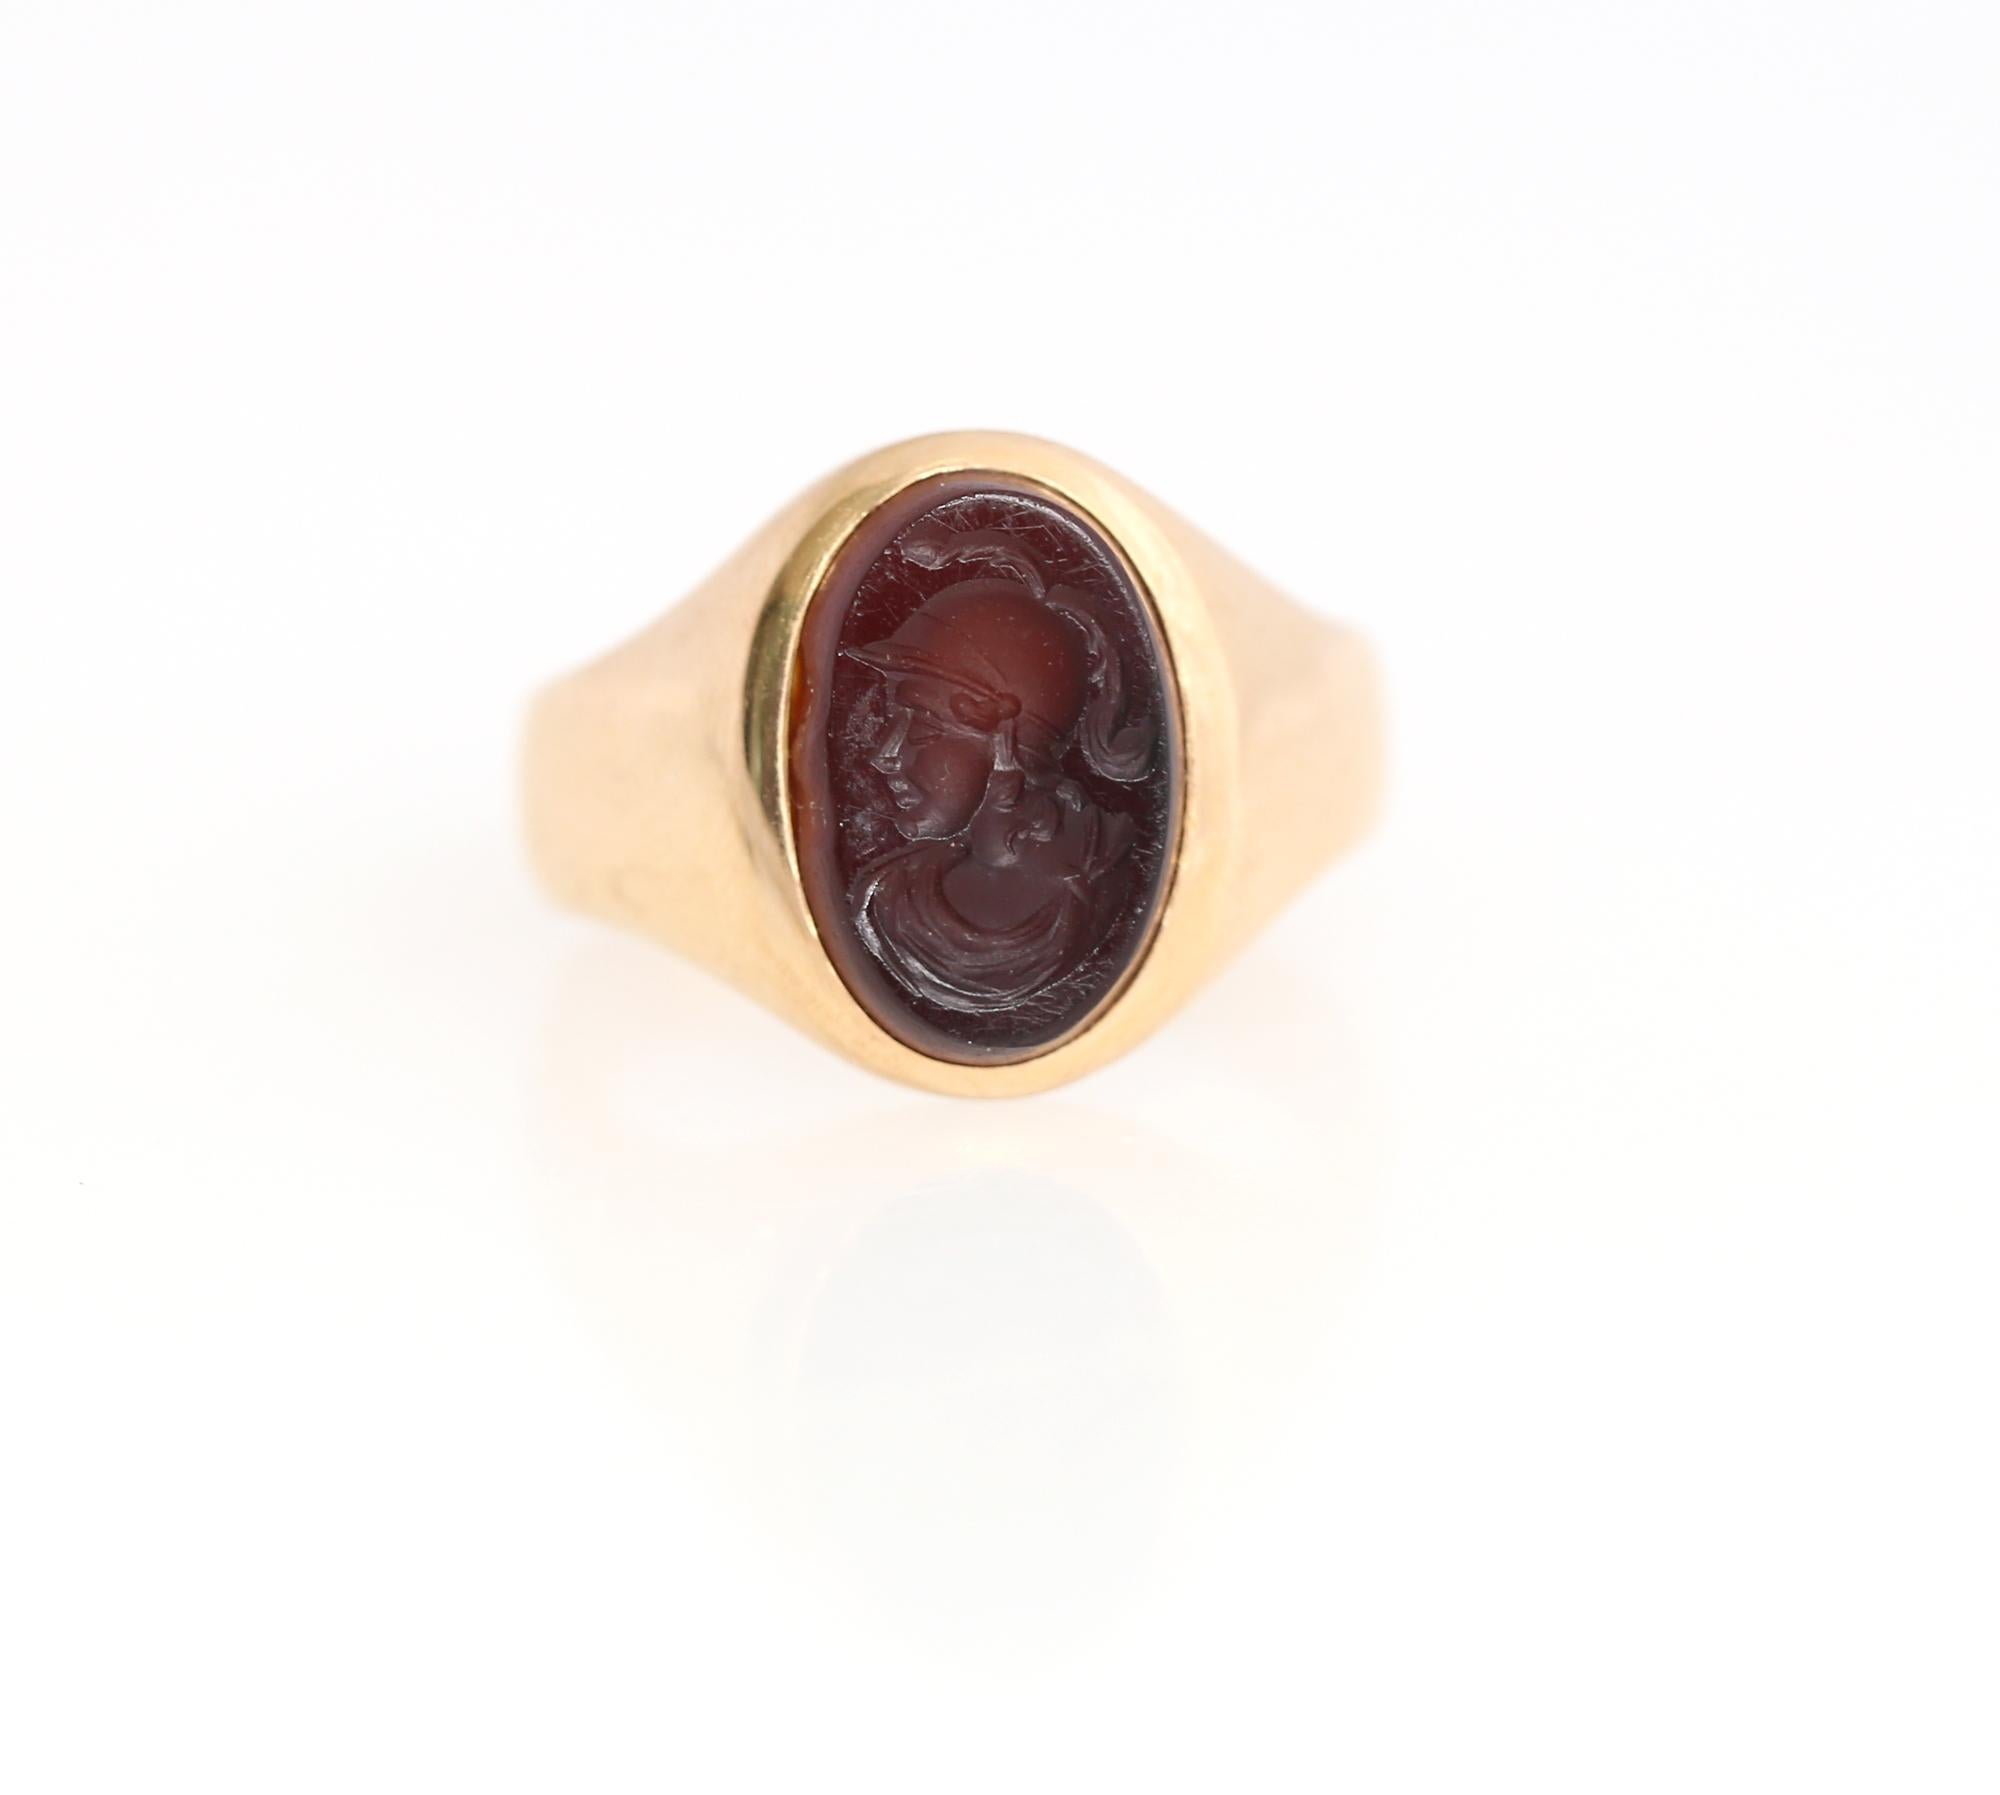 Carven Red Onyx Gold Ring Signet. A beautiful warrior profile with a plumage helmet is carved in onyx. The ring is of Italian origin, very masterfully crafted. It is a really fine item both for jewelry collection and to be worn proudly.

Weight: 